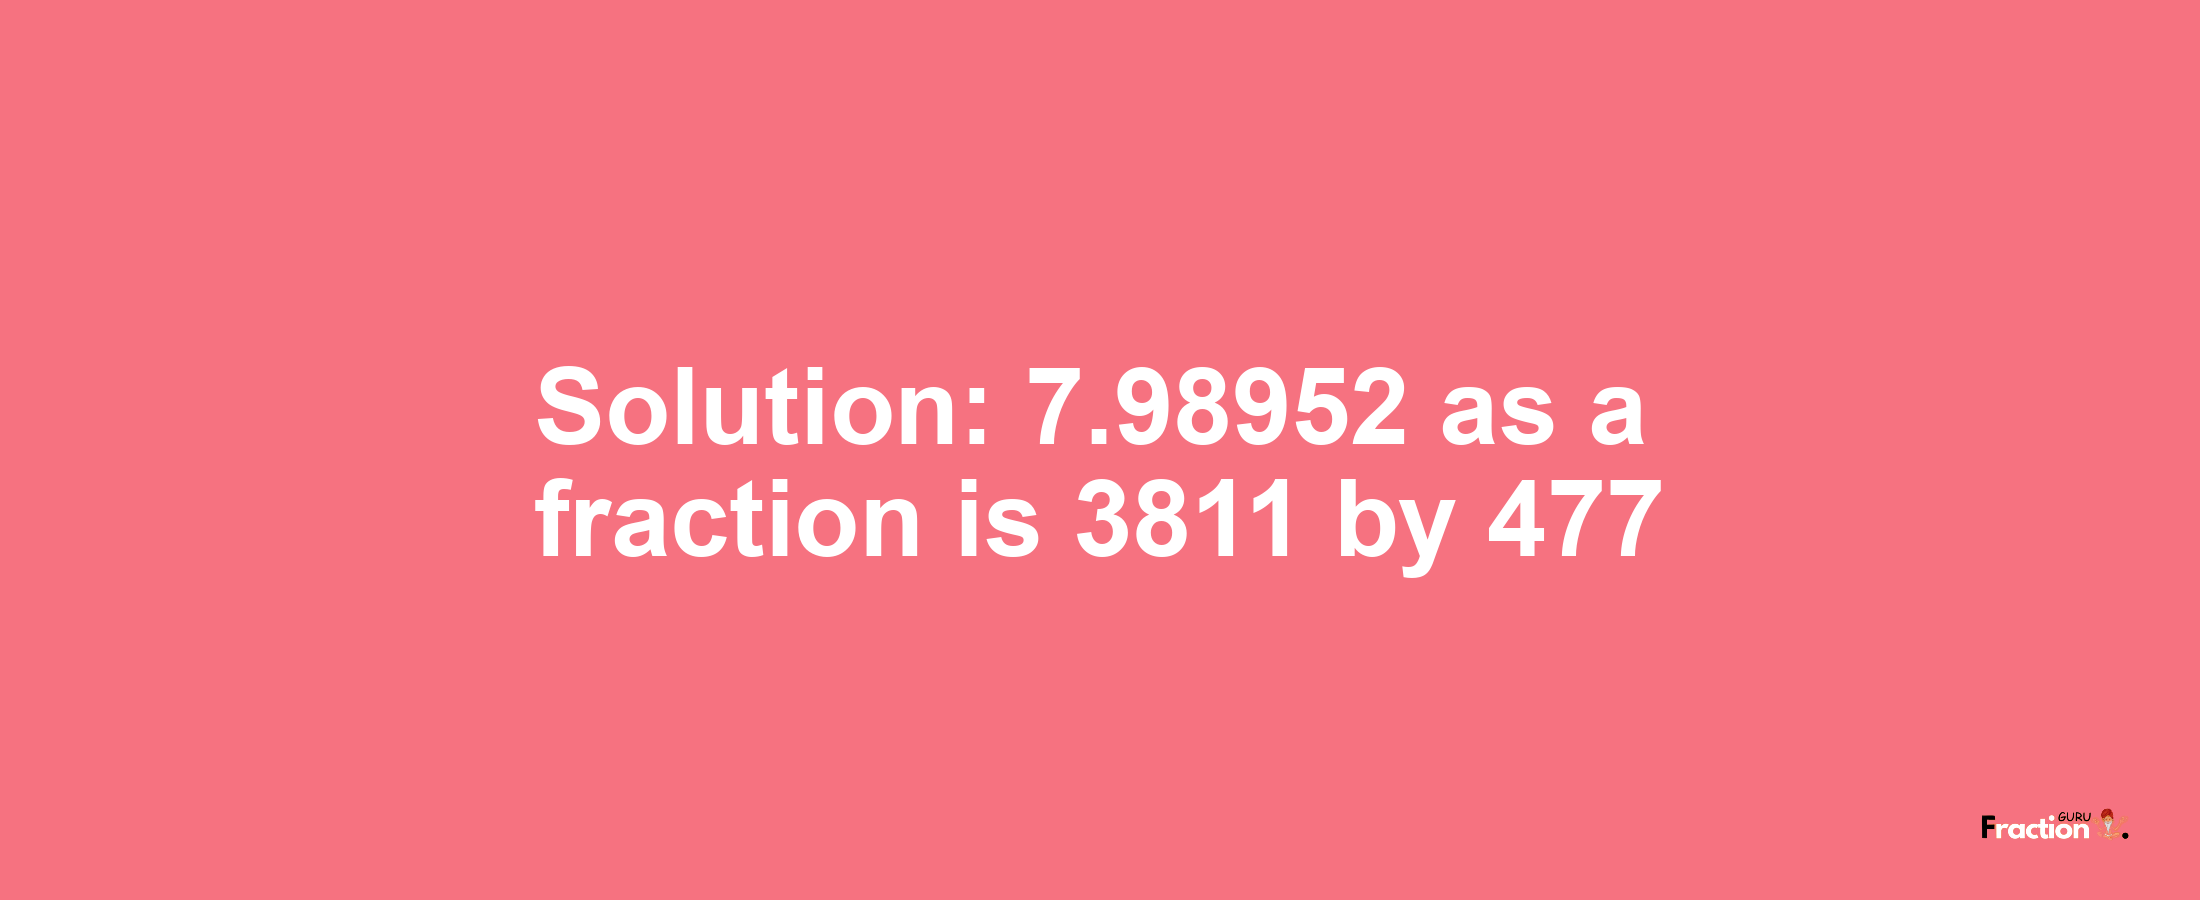 Solution:7.98952 as a fraction is 3811/477